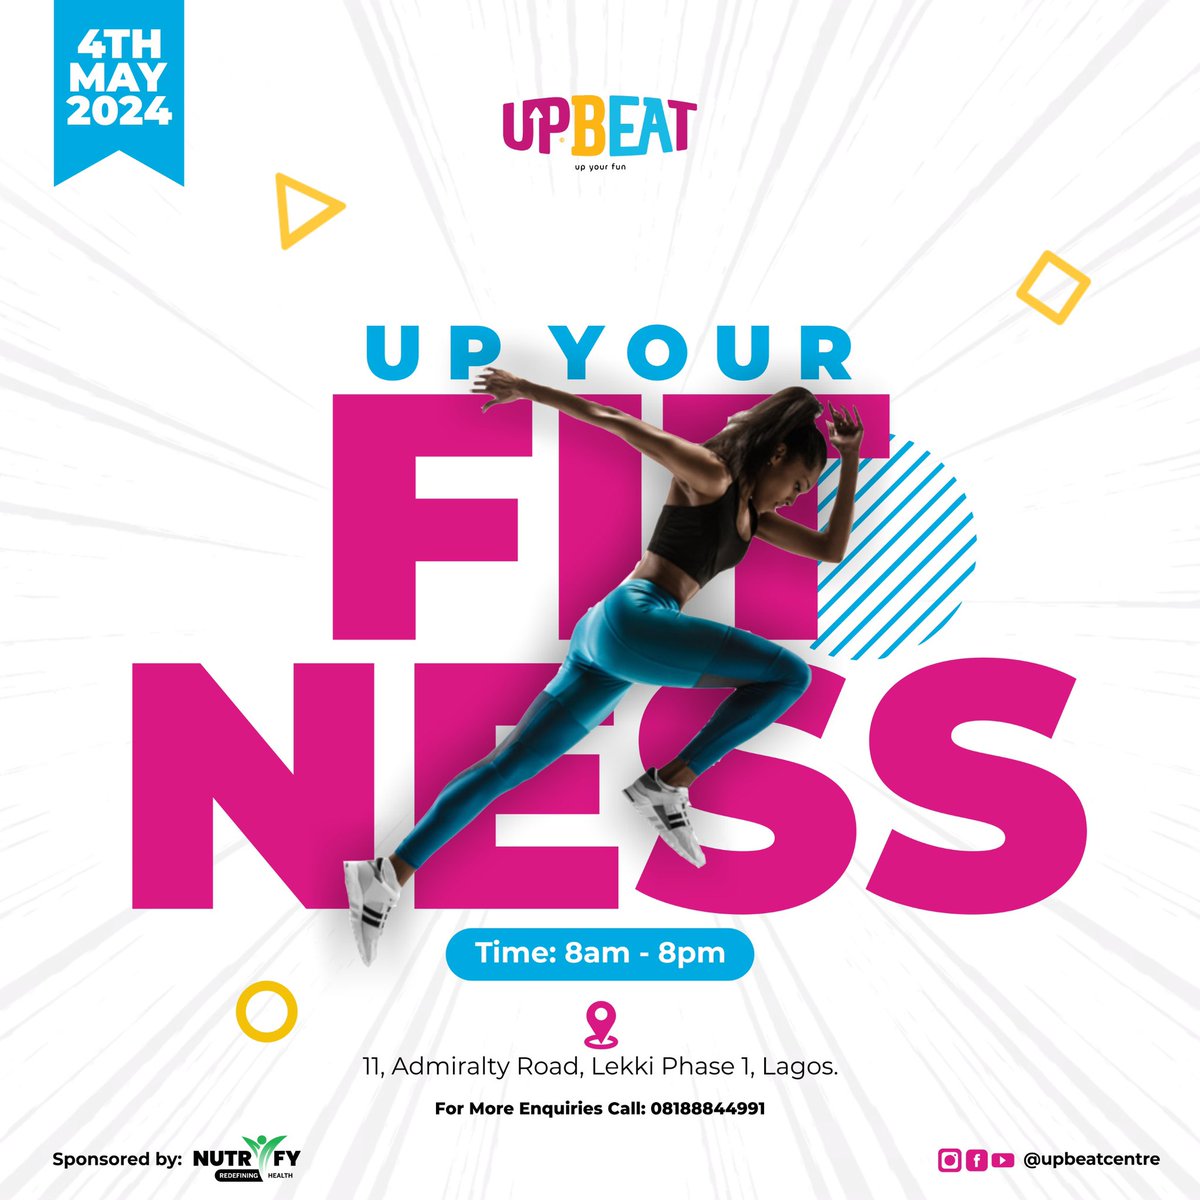 Are you ready for Upbeat Stepathon 2024!!!! Join us tomorrow, 4th of May, for a day of fun fitness. 📍Upbeat Centre, 11 Admiralty Rd, Lekki phase 1, Lagos. ⏰ starts 8am to 8pm Sponsored by @NutrifyNigeria #weekendvibe #upbeatstepathon #saturday #Upbeatcentre #funinlagos